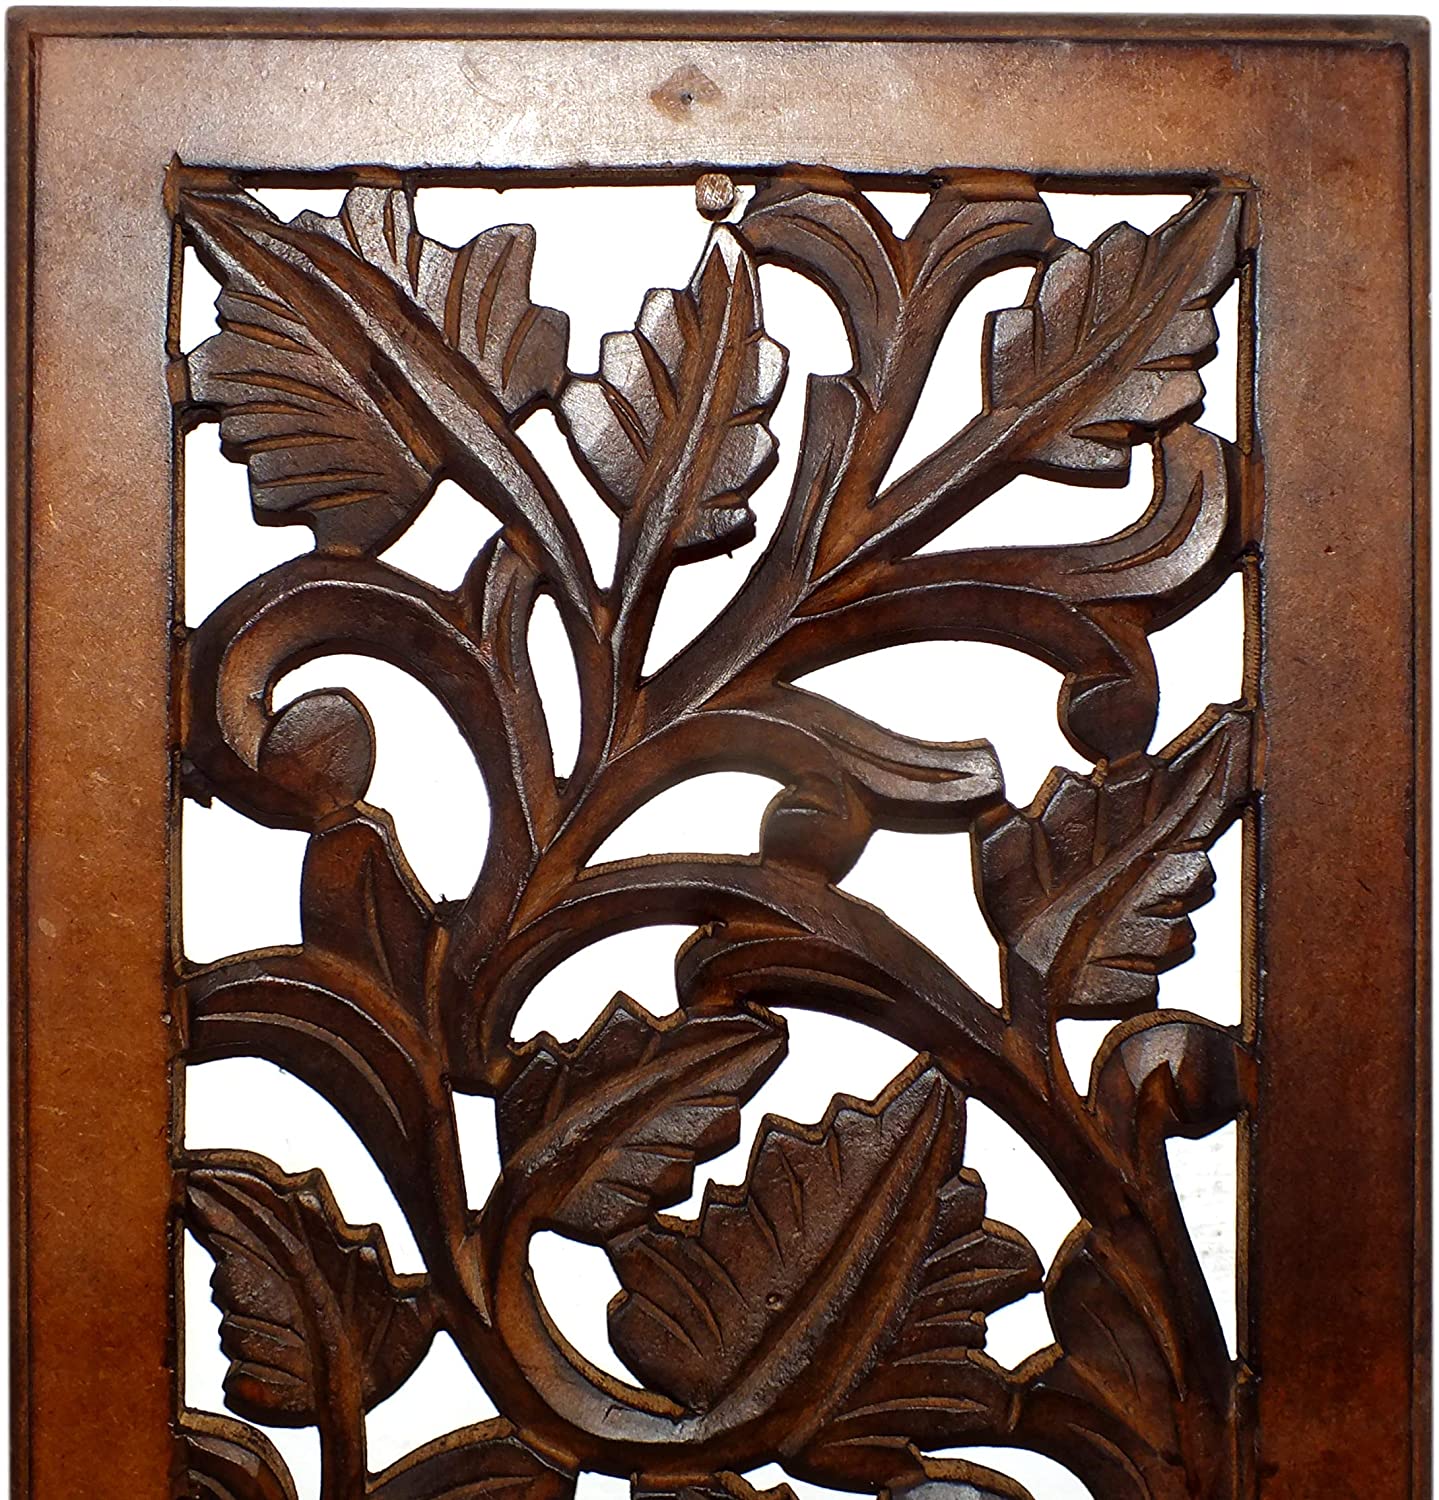 Mango Wood Wall Panel Hand Crafted with Leaves and Scroll Work Motif, Rectangle, Brown